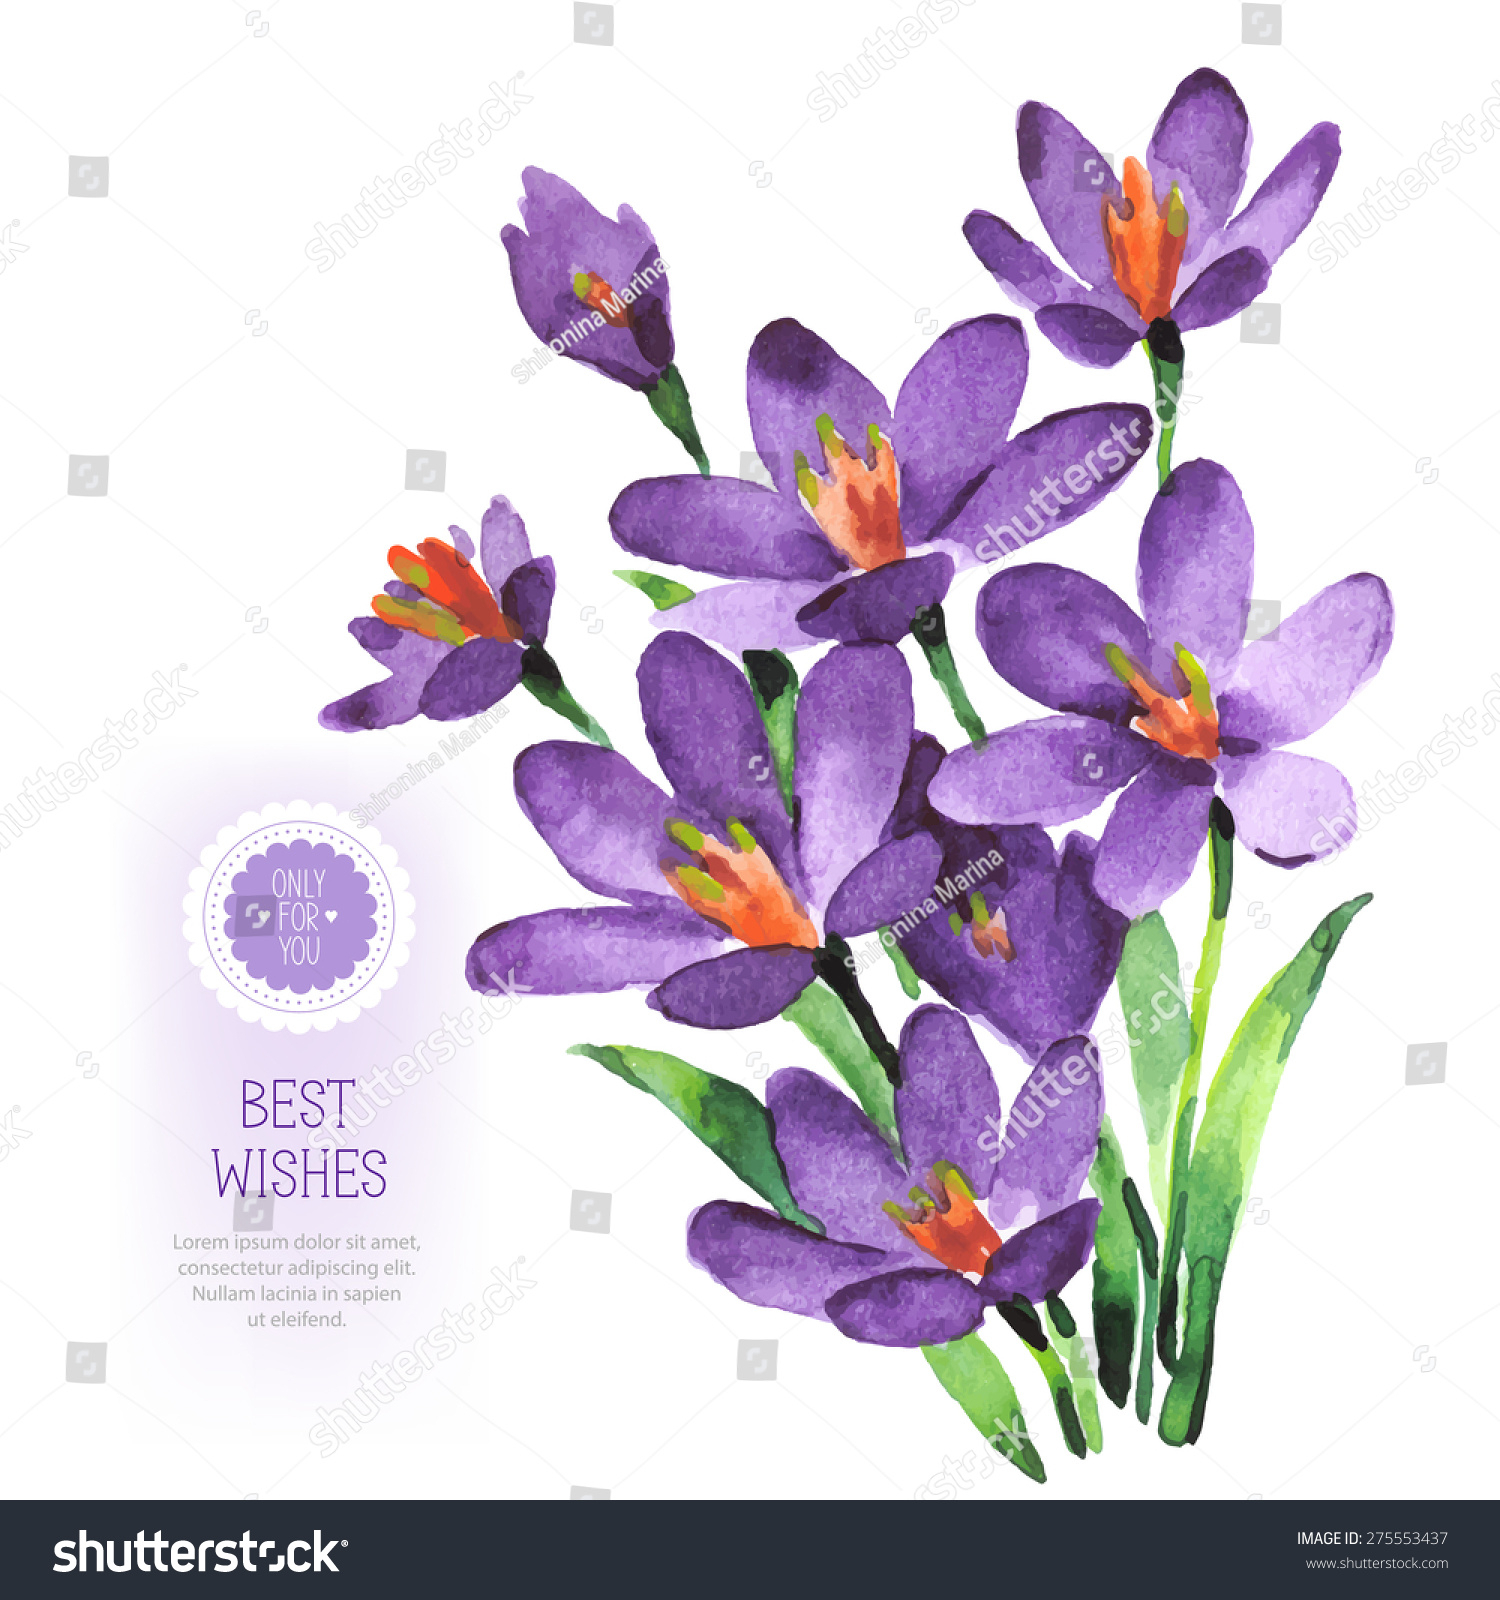 Purple Flowers Drawing at GetDrawings.com | Free for personal use ...